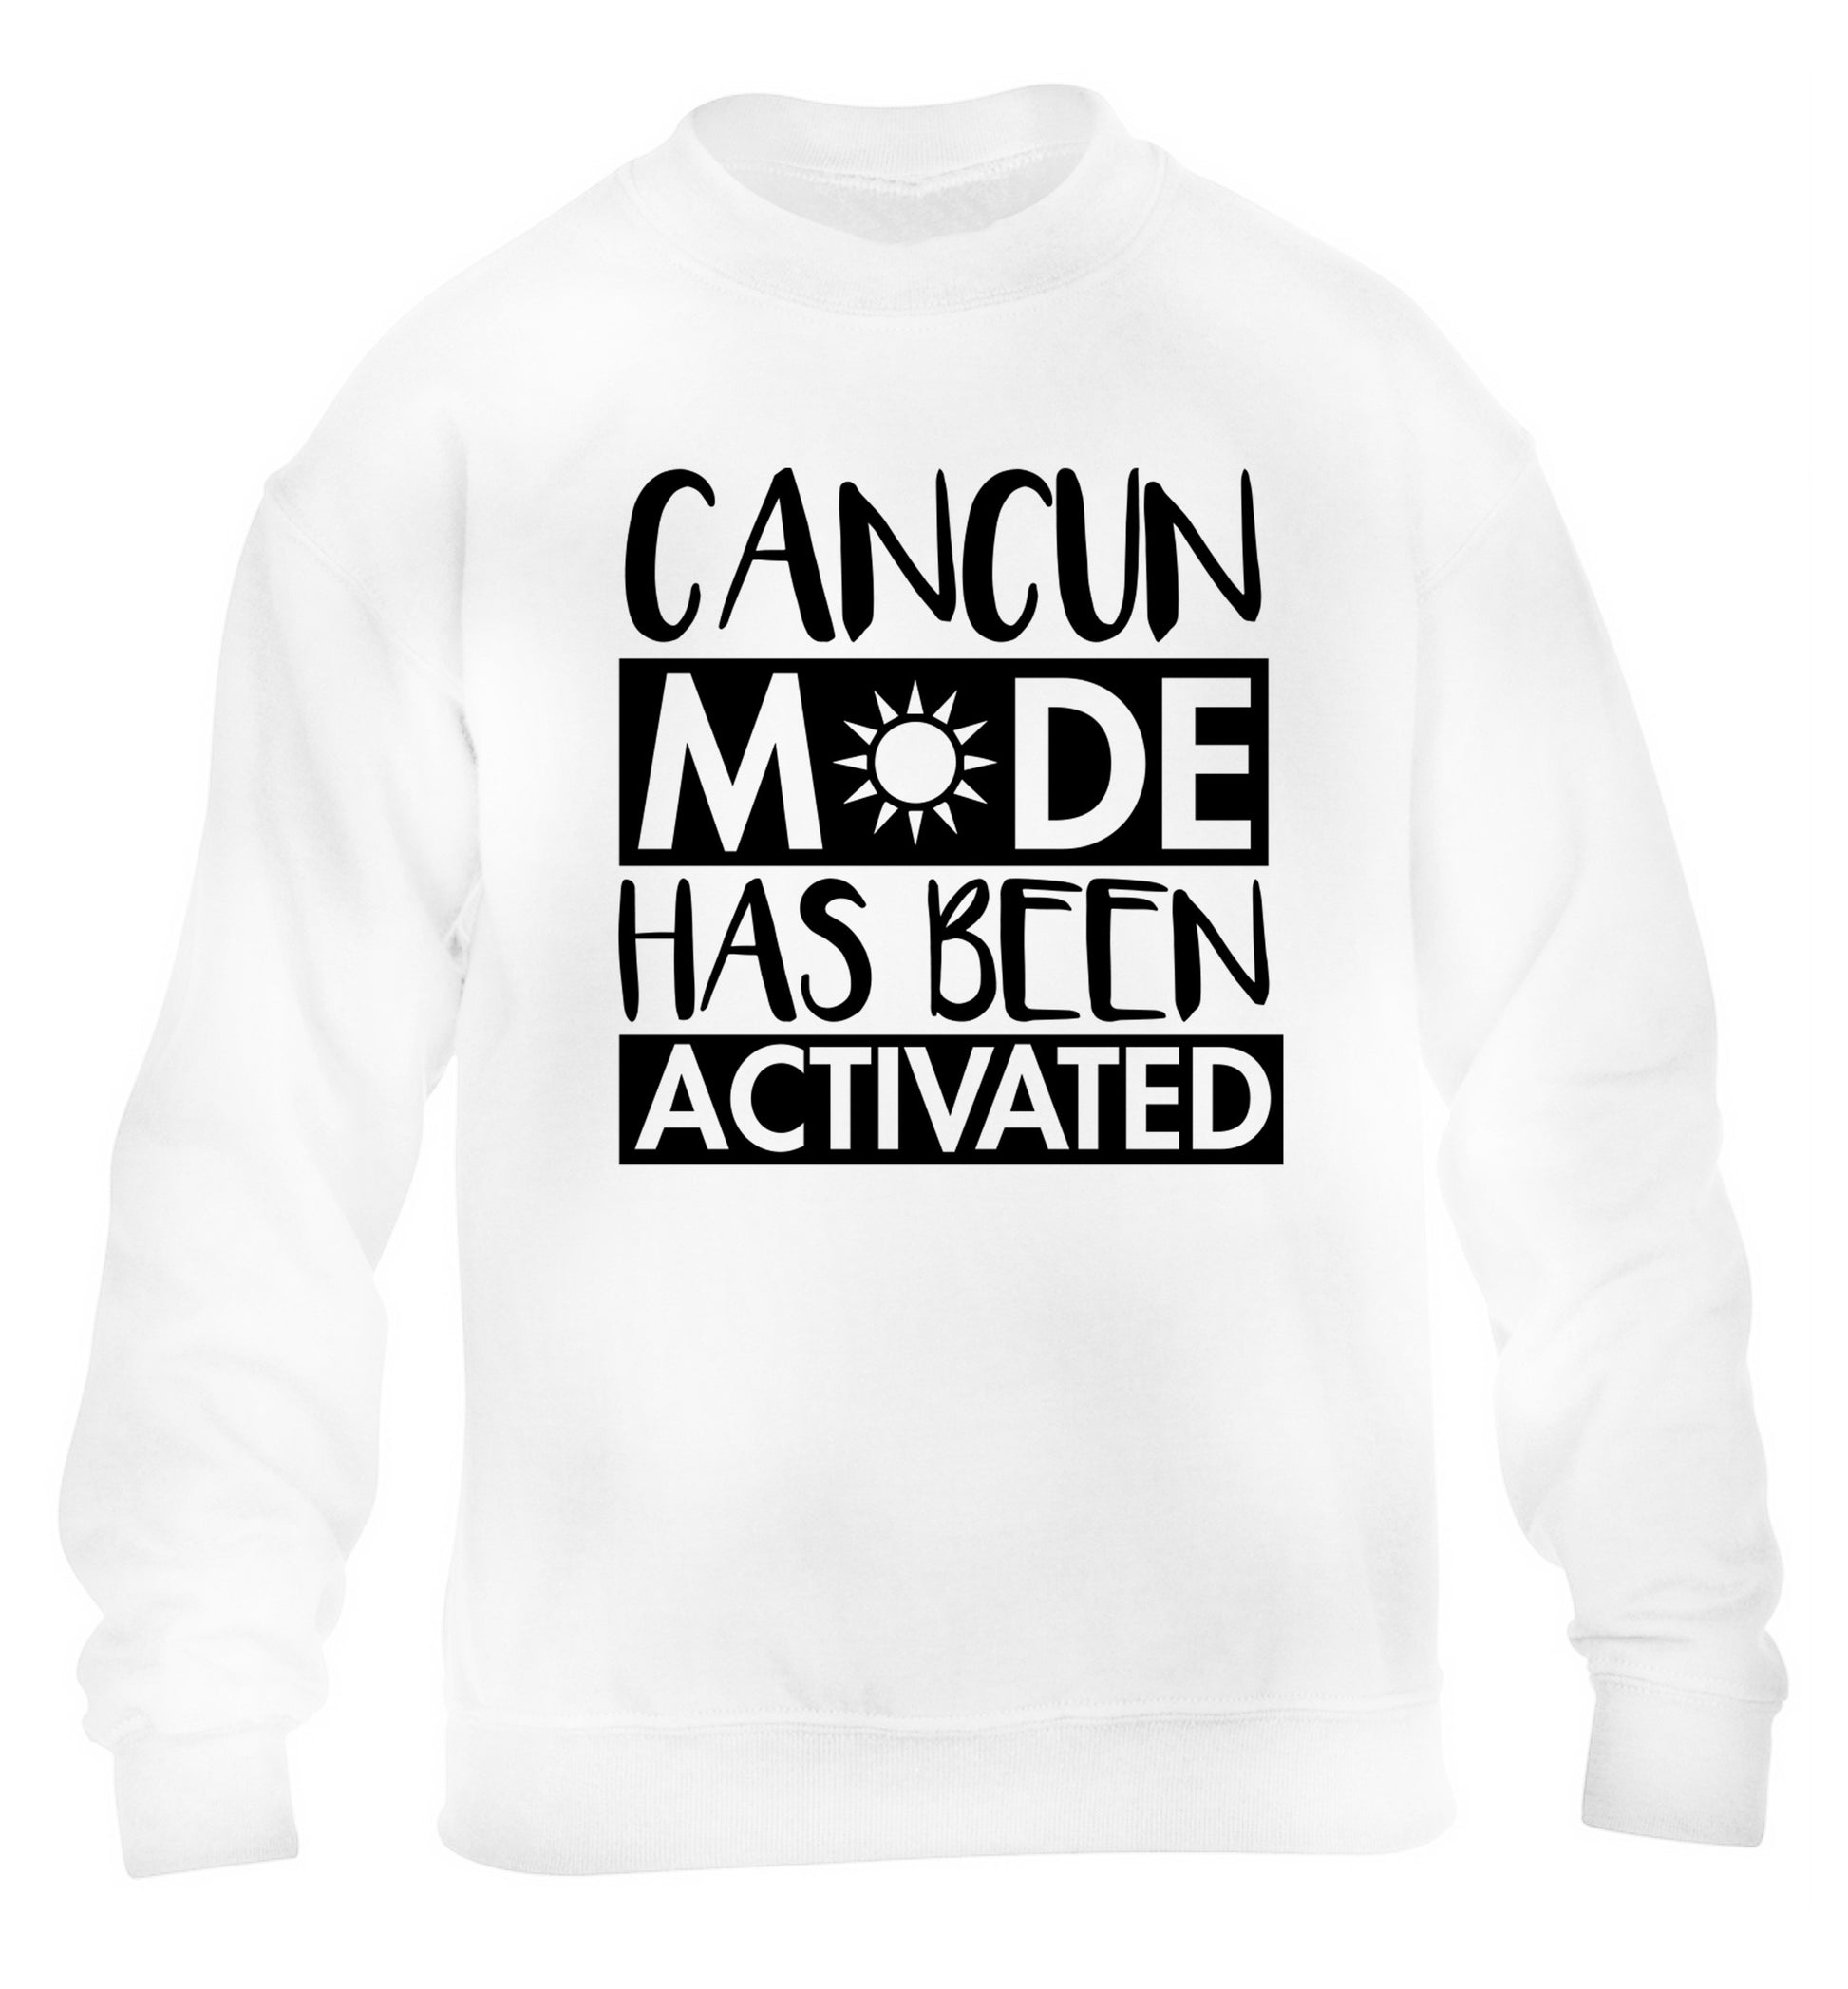 Cancun mode has been activated children's white sweater 12-14 Years